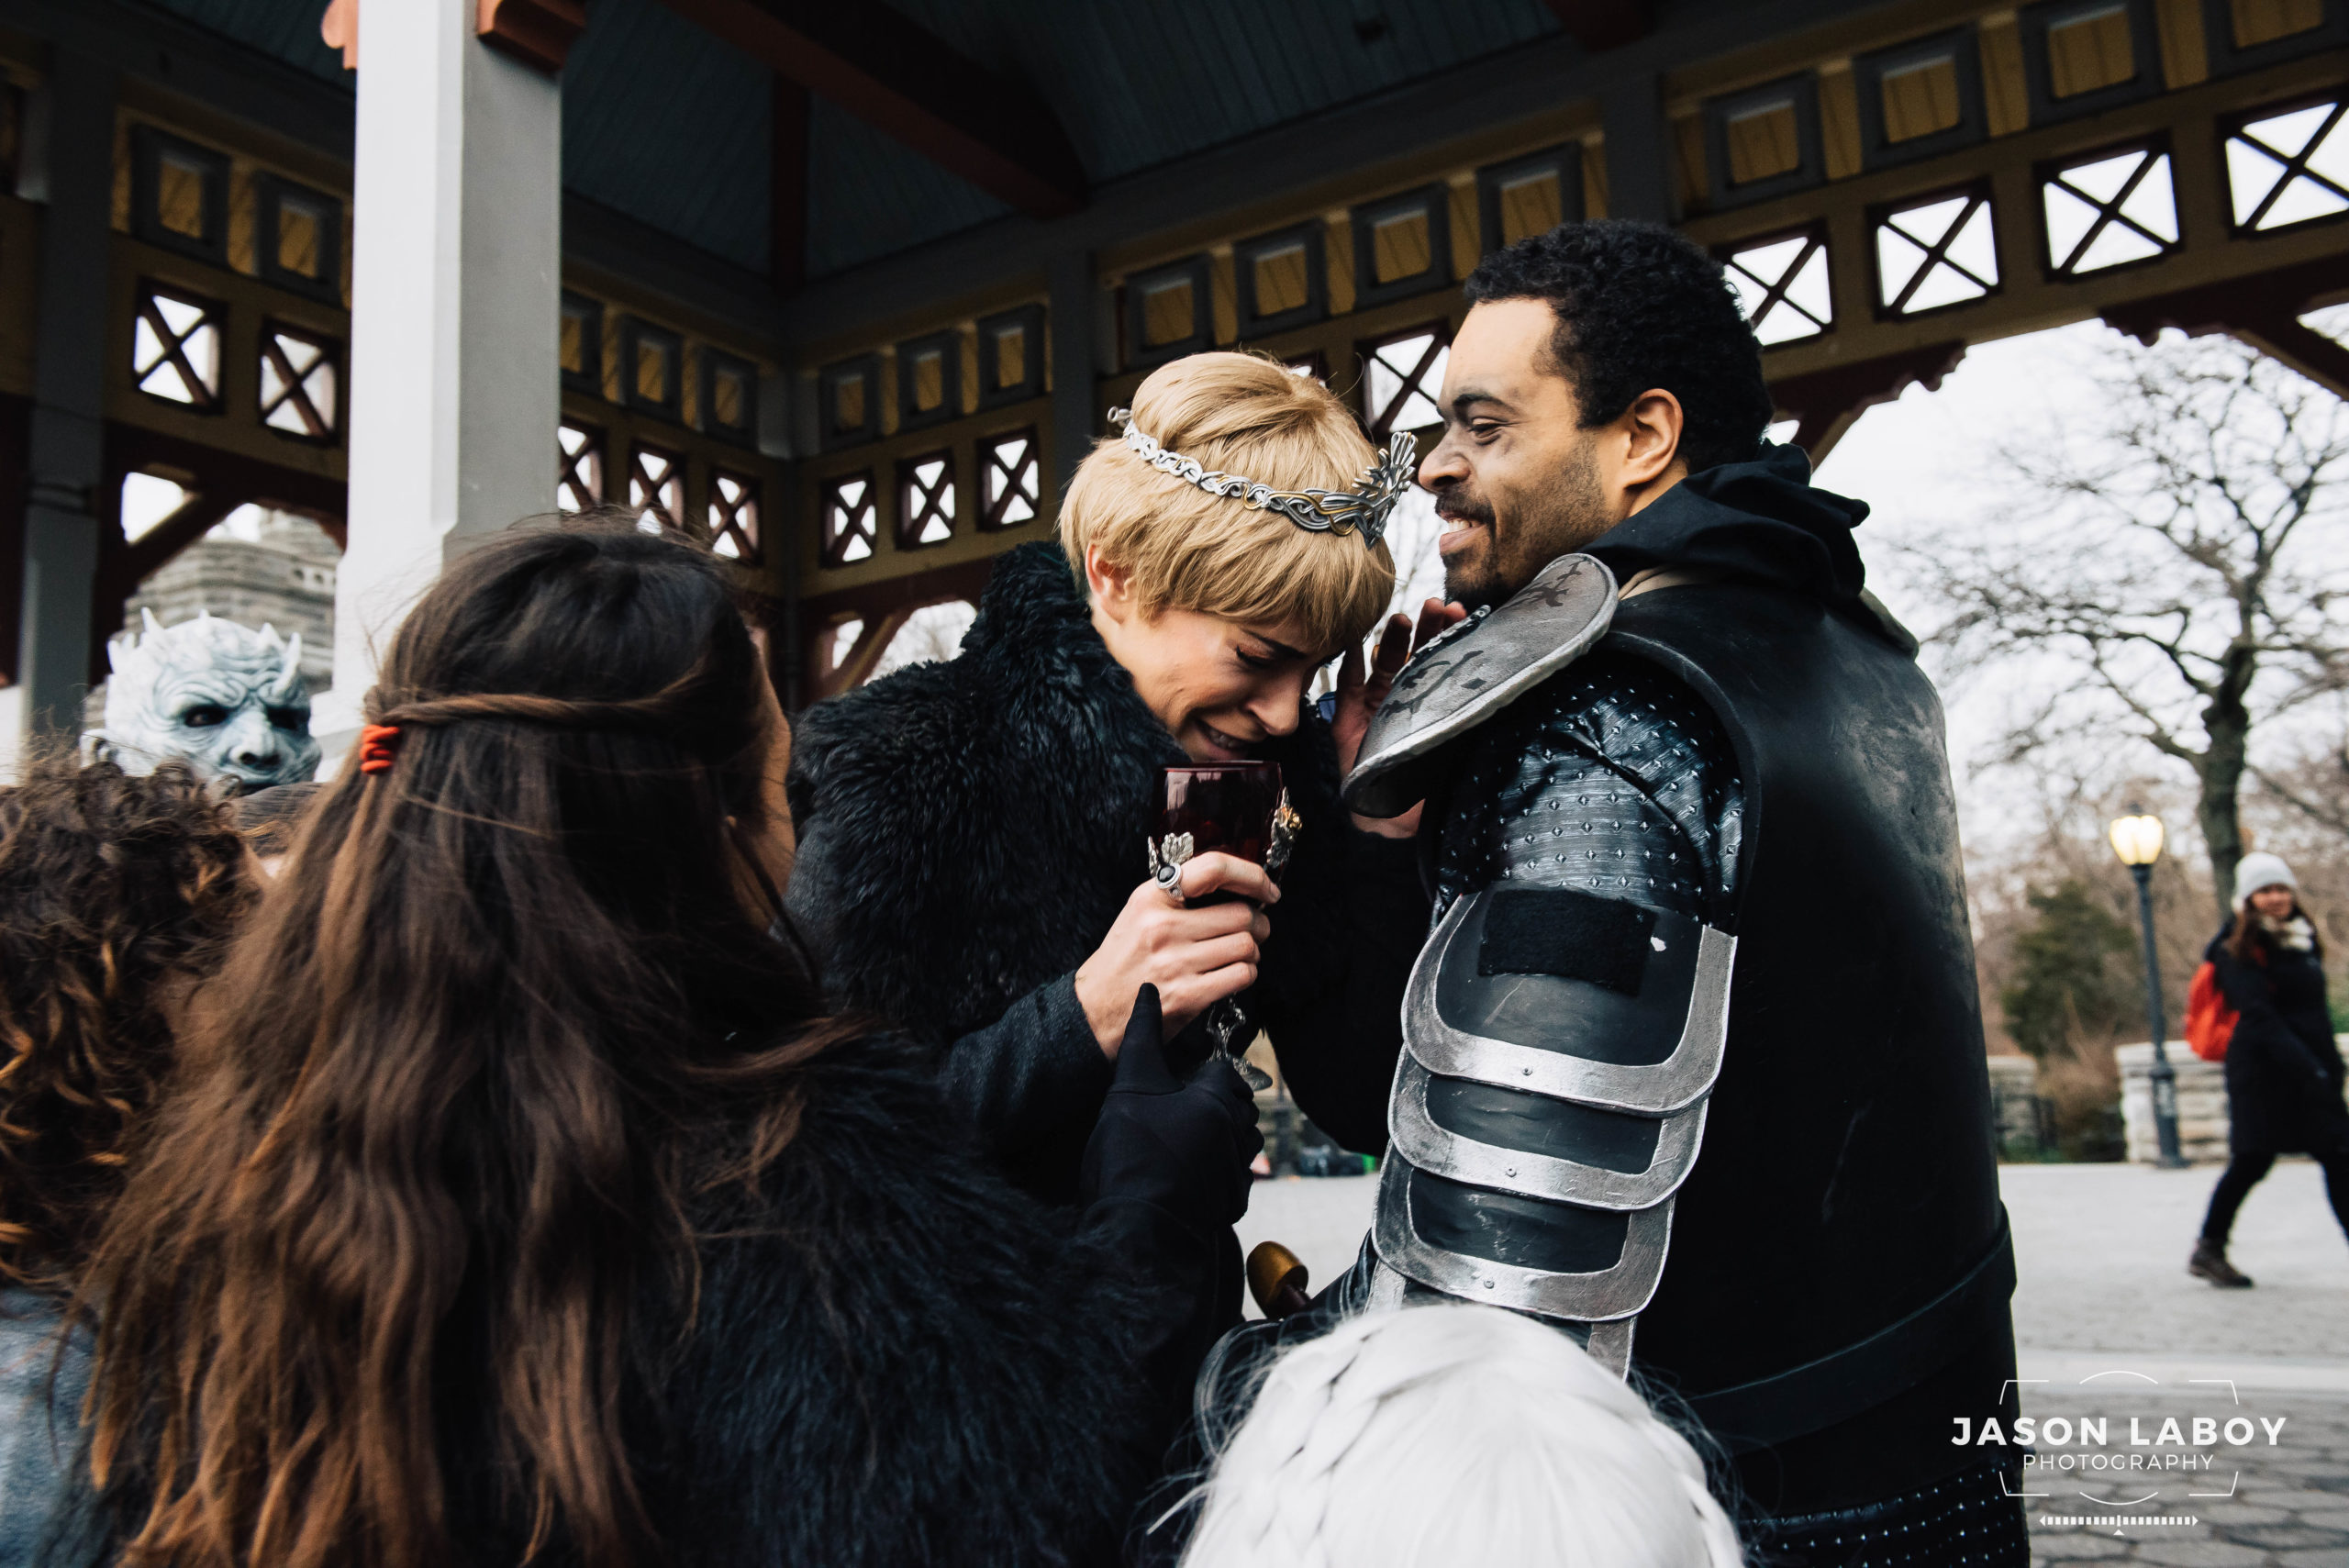 Game Of Thrones Cosplay Got The Whole Gang Together (For A Wedding Proposal)